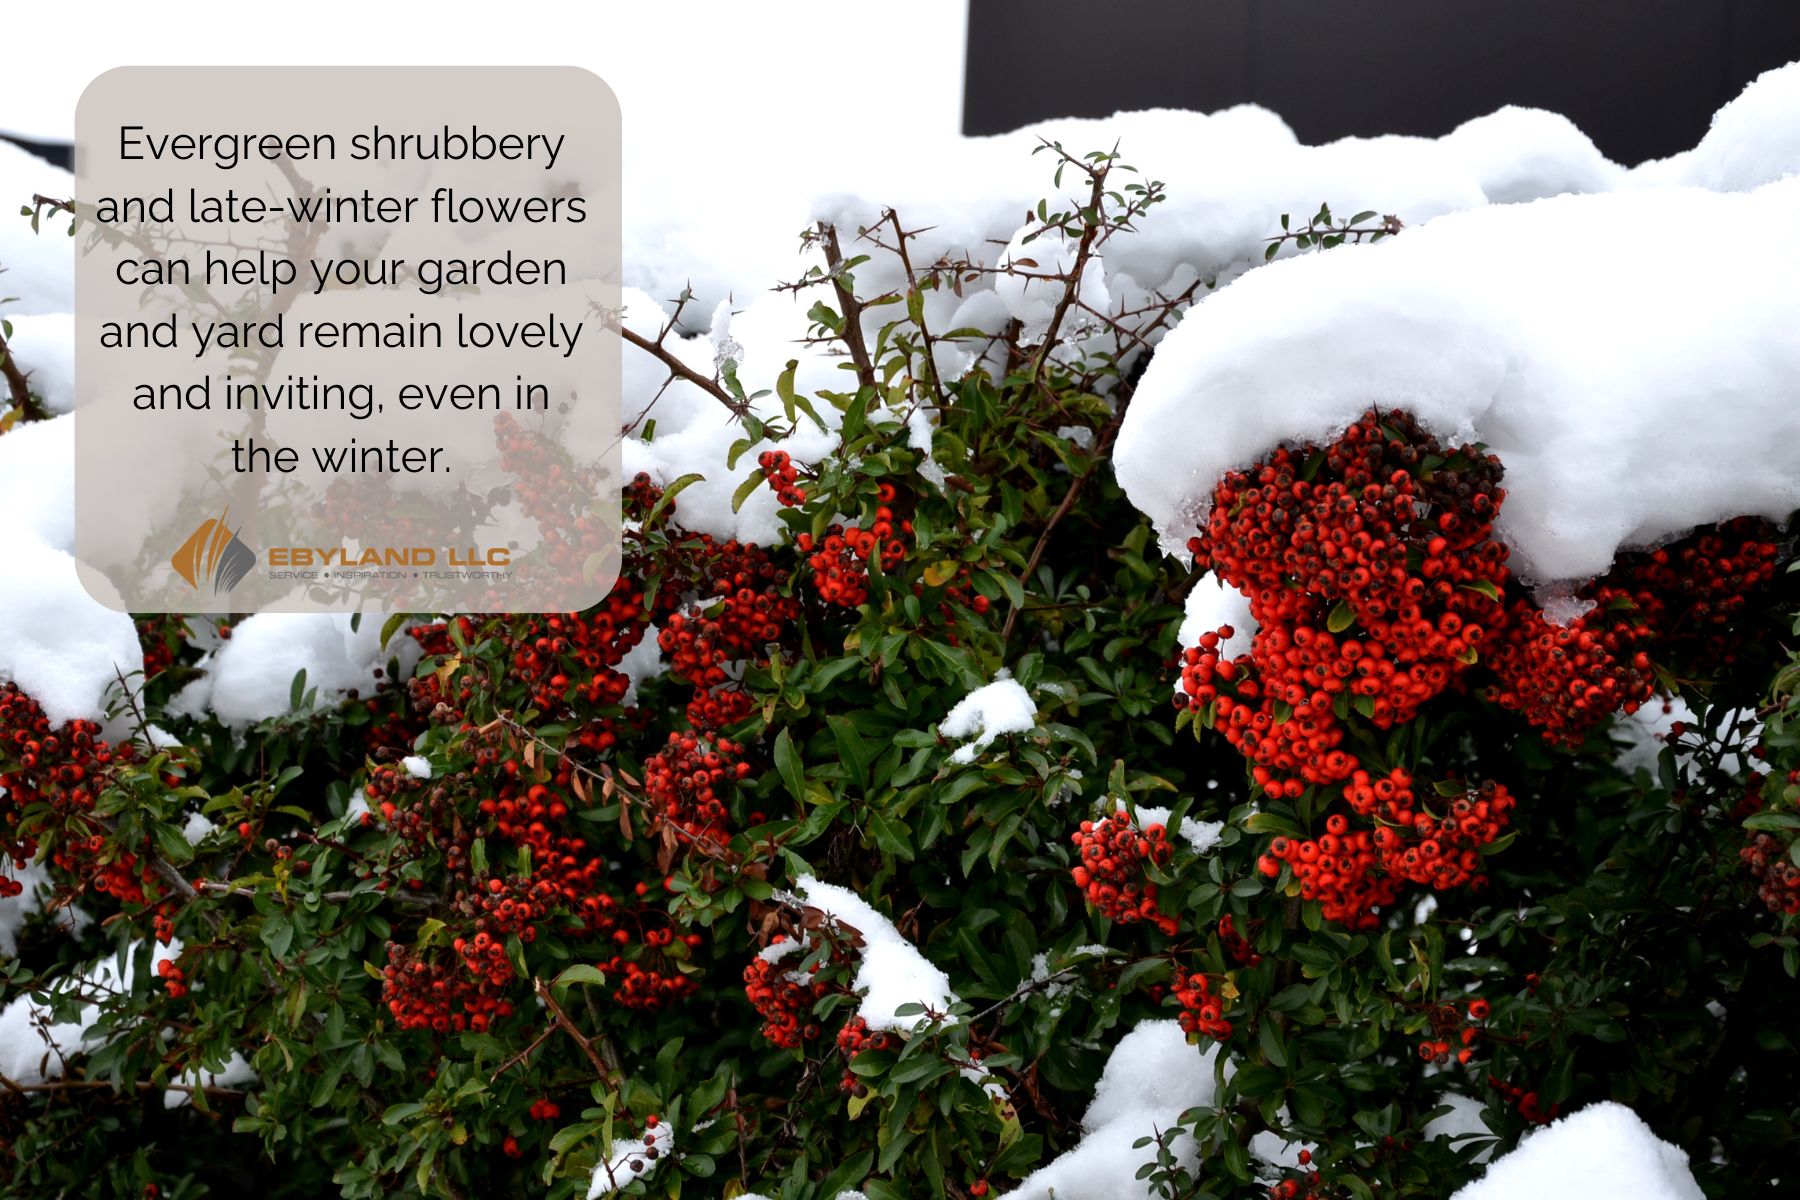 Bush with red berries coated with snow. Text overlay highlights the benefits of evergreen shrubs and late-winter flowers for garden aesthetics during winter.